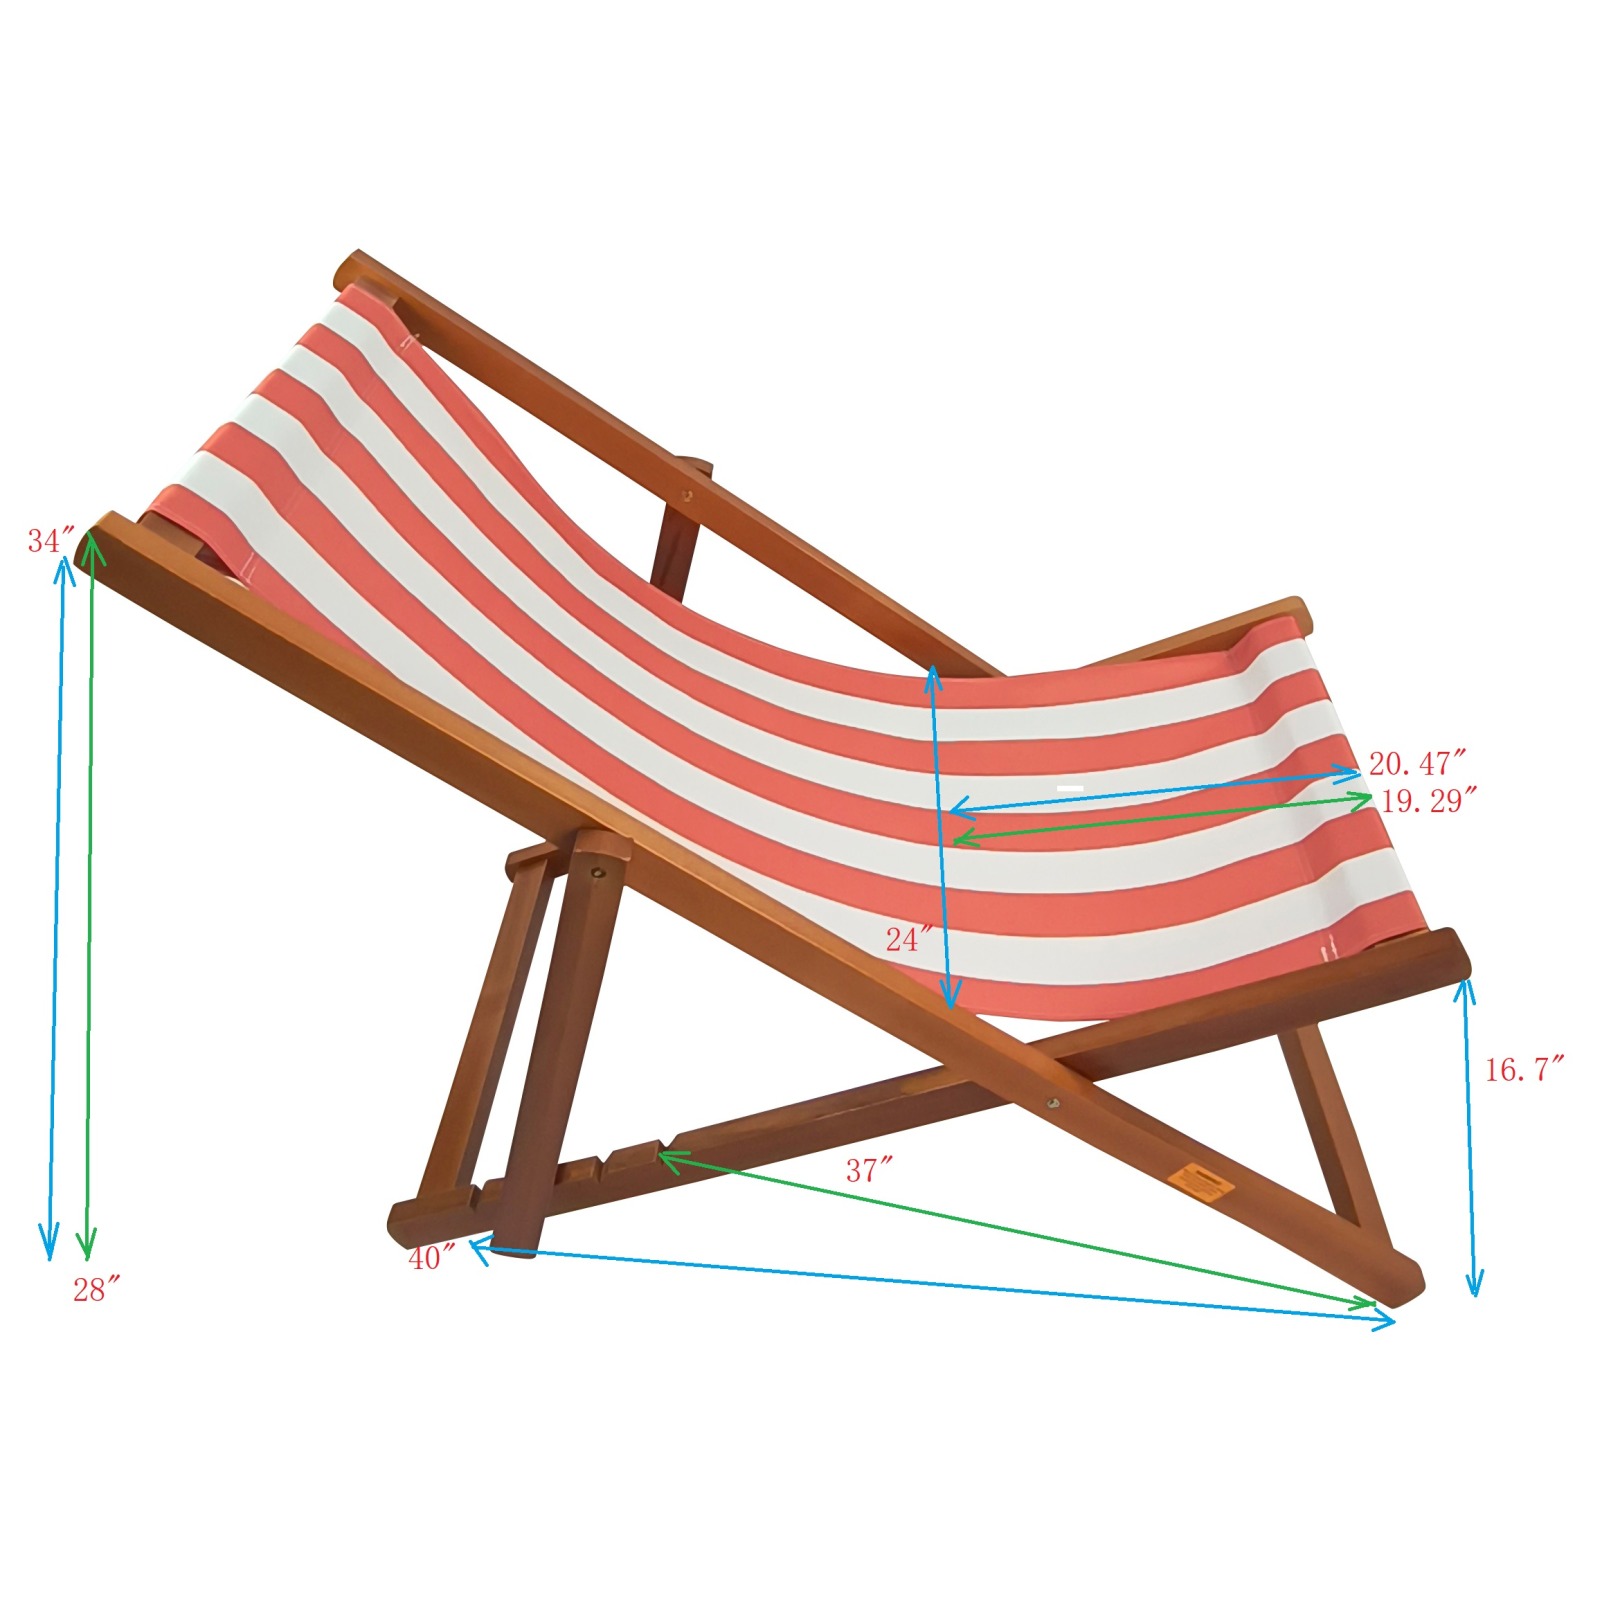 Outdoor Folding Beach Chaise Lounge Chair Camping Recliner, Sling Chair Beach Recliner, Beach Chair with Adjustable Back, Pool Chair Outdoor Chair Garden Chair, Portable Chair - image 2 of 7